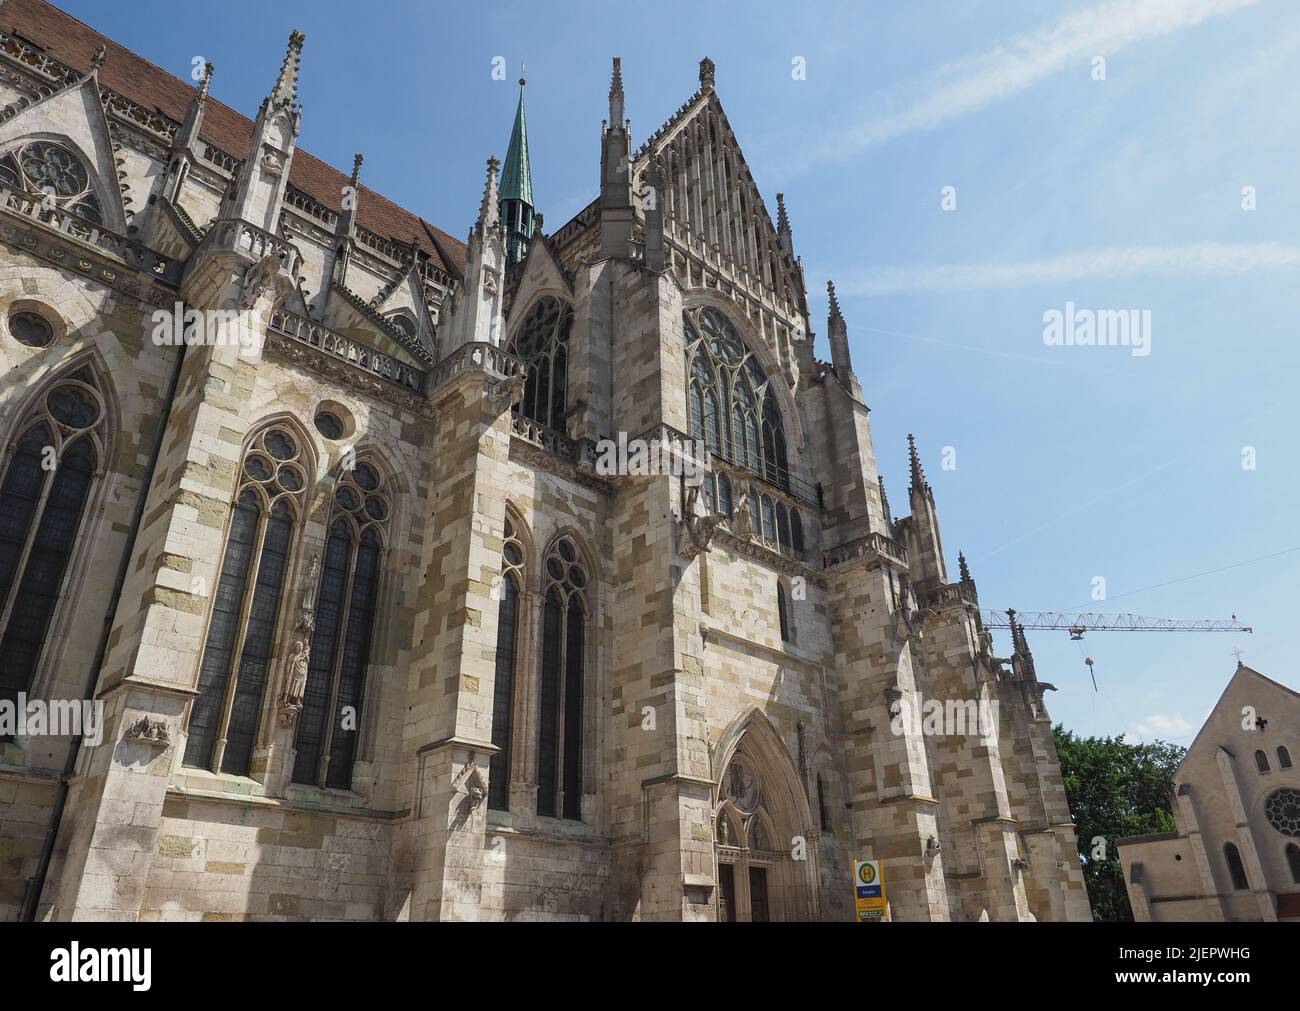 Regensburger Dom aka St Peter cathedral church in Regensburg, Germany Stock Photo